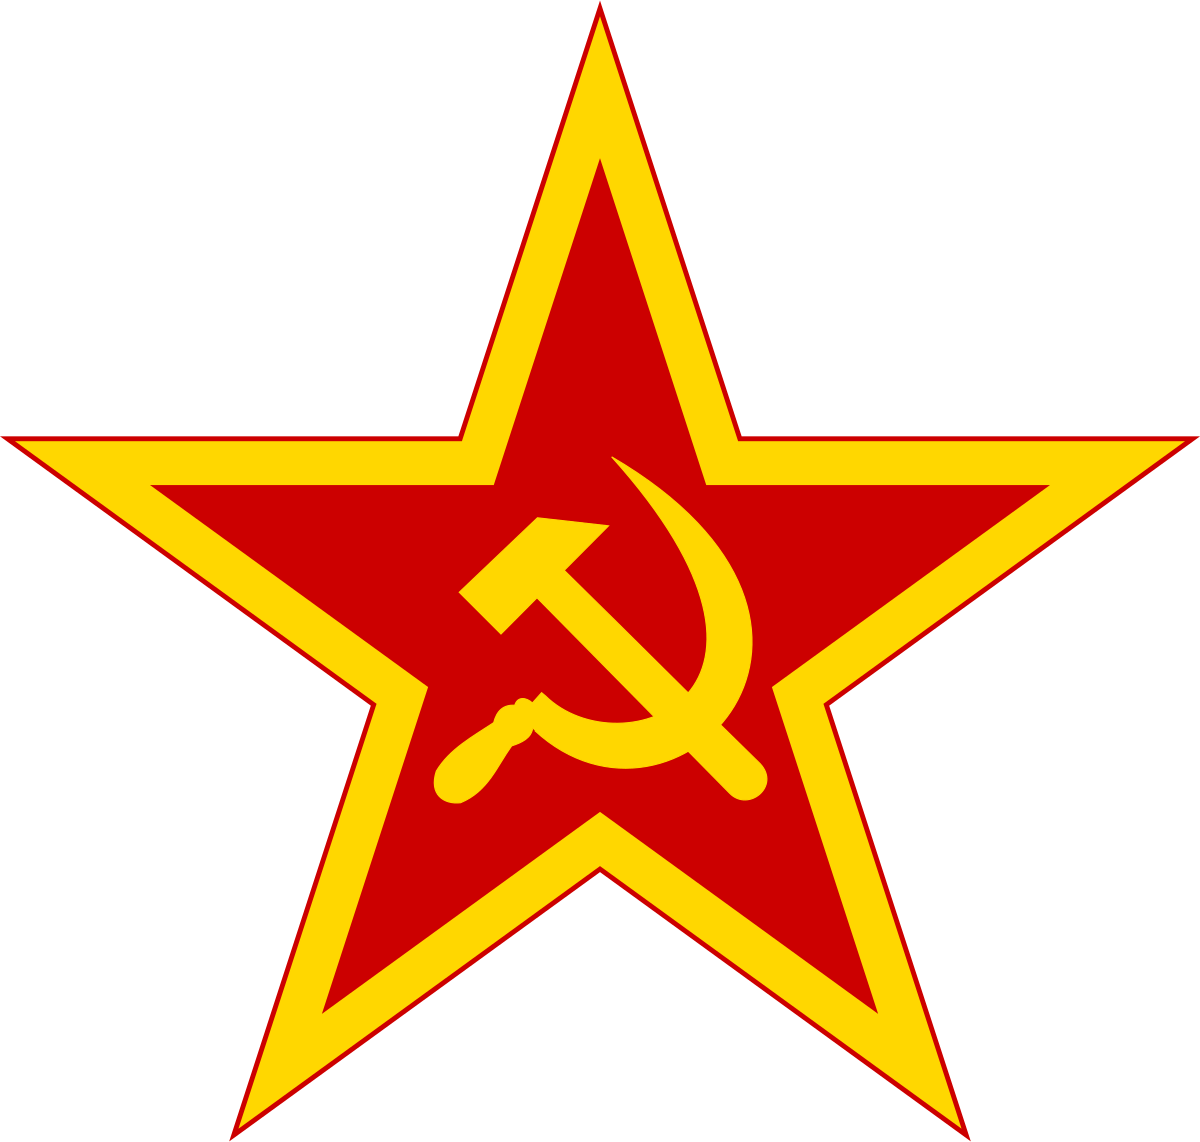 Yellow with Red Outline Logo - Communist symbolism